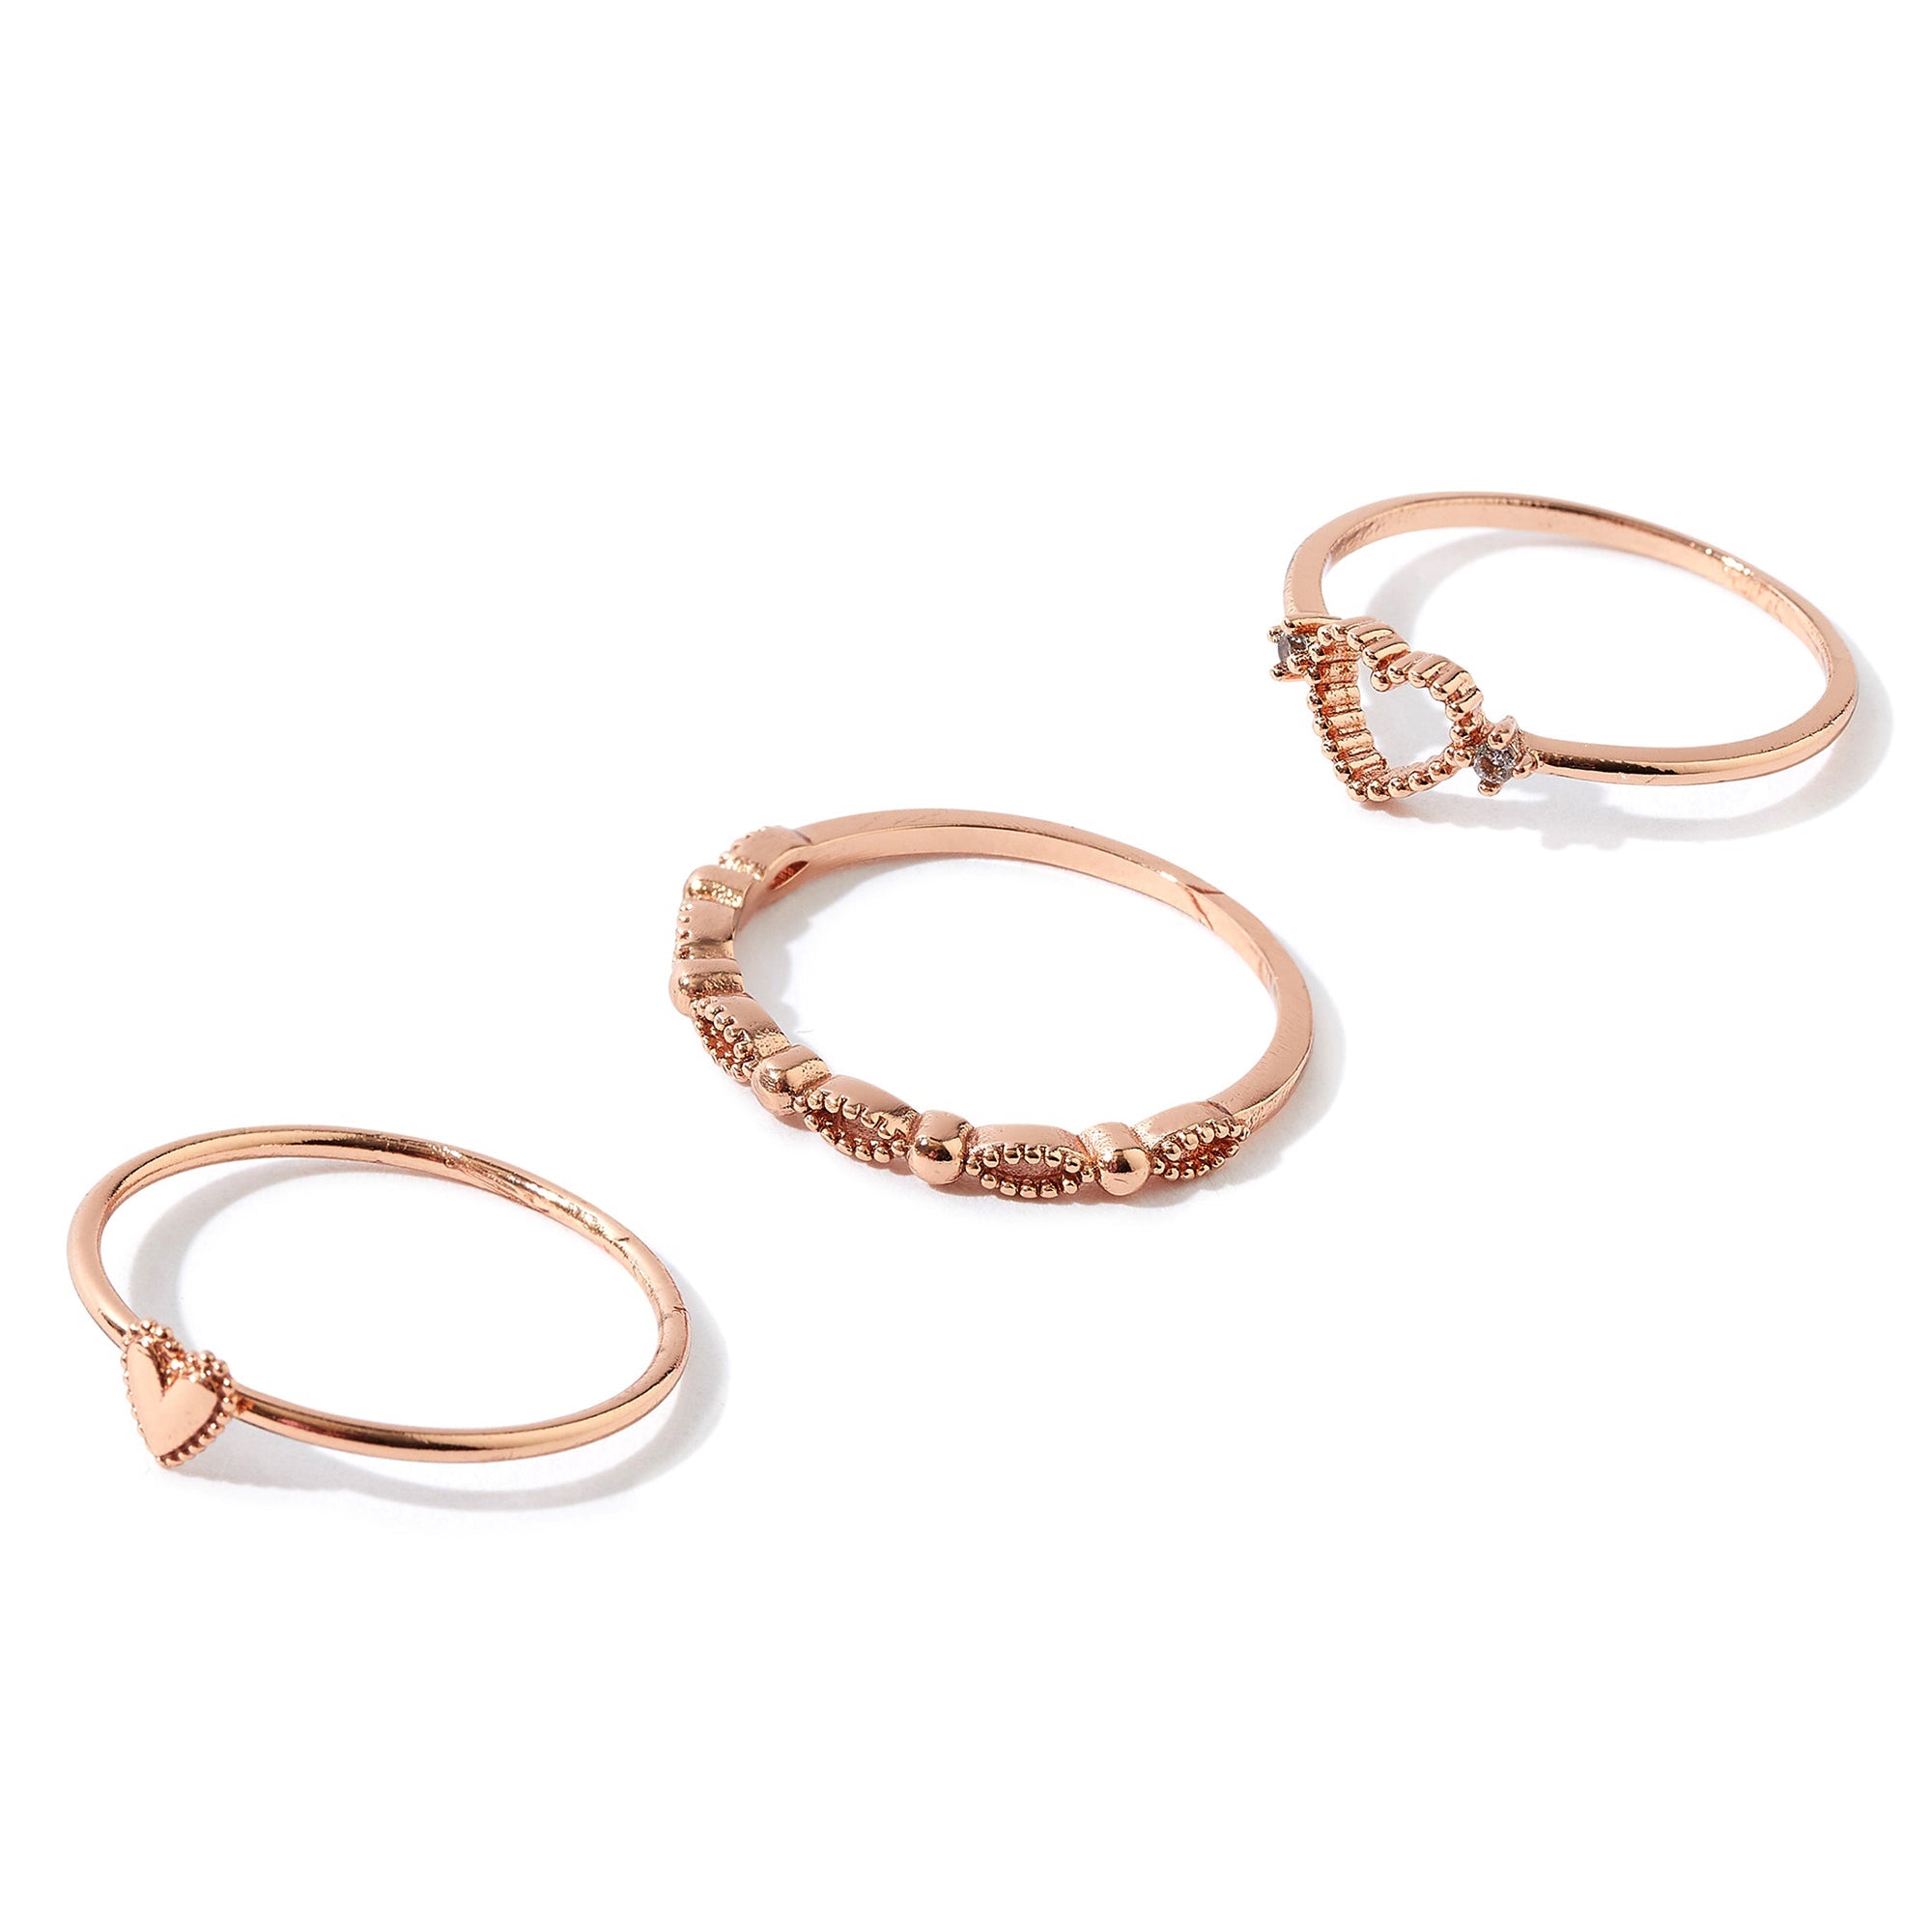 Real Gold Plated 3 Pack Stacking Rings For Women By Accessorize London Extra Small